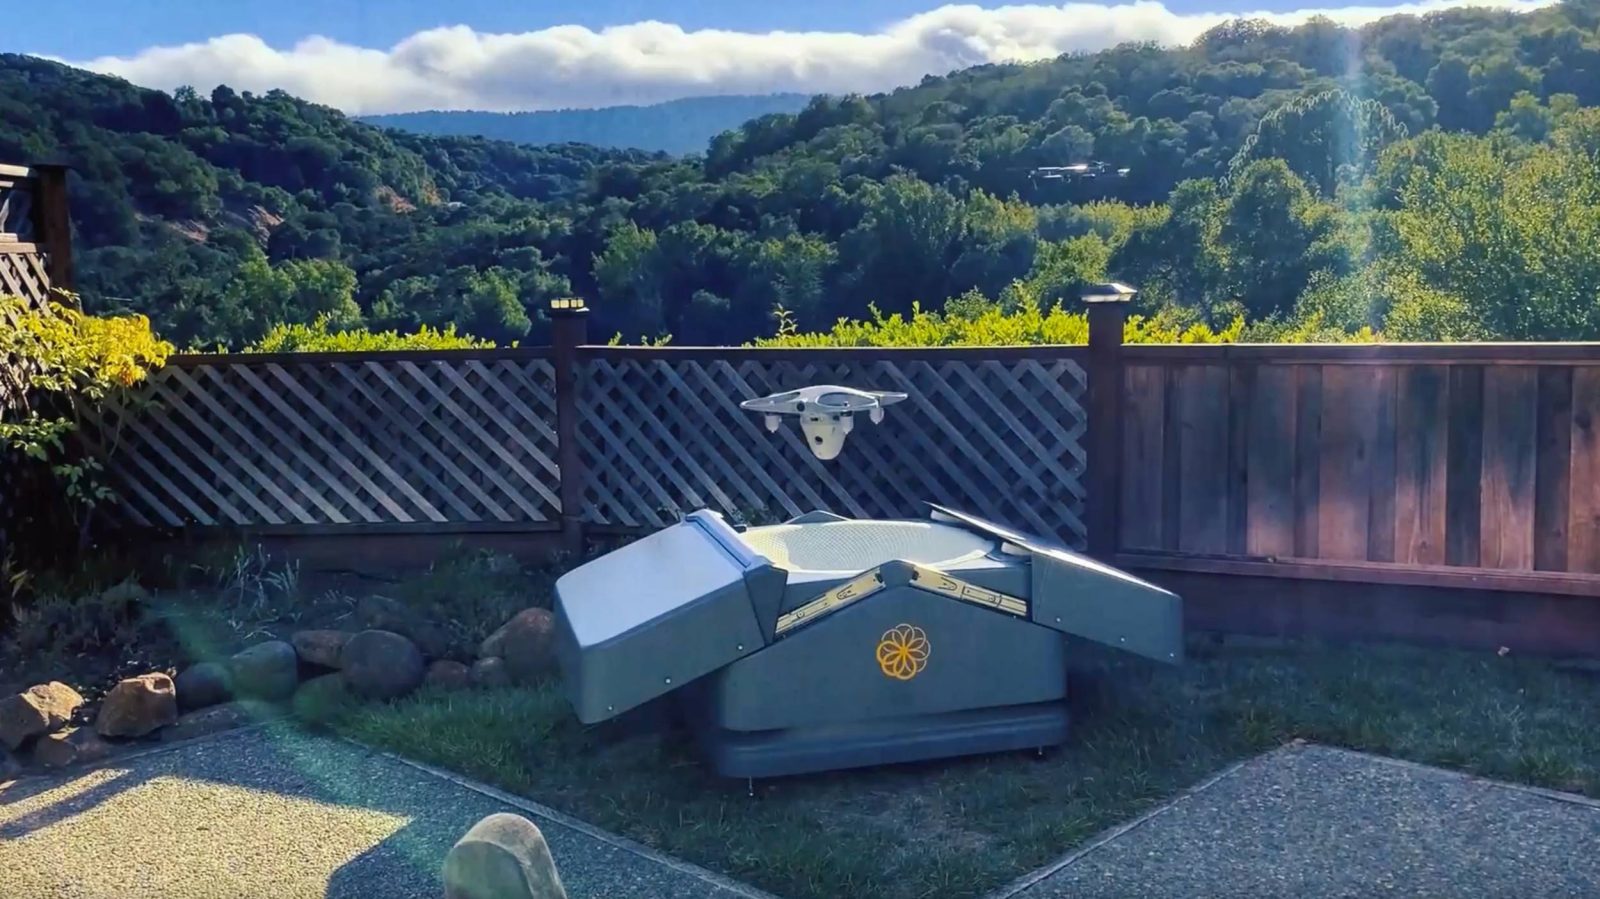 The Sunflower drone security system for your home